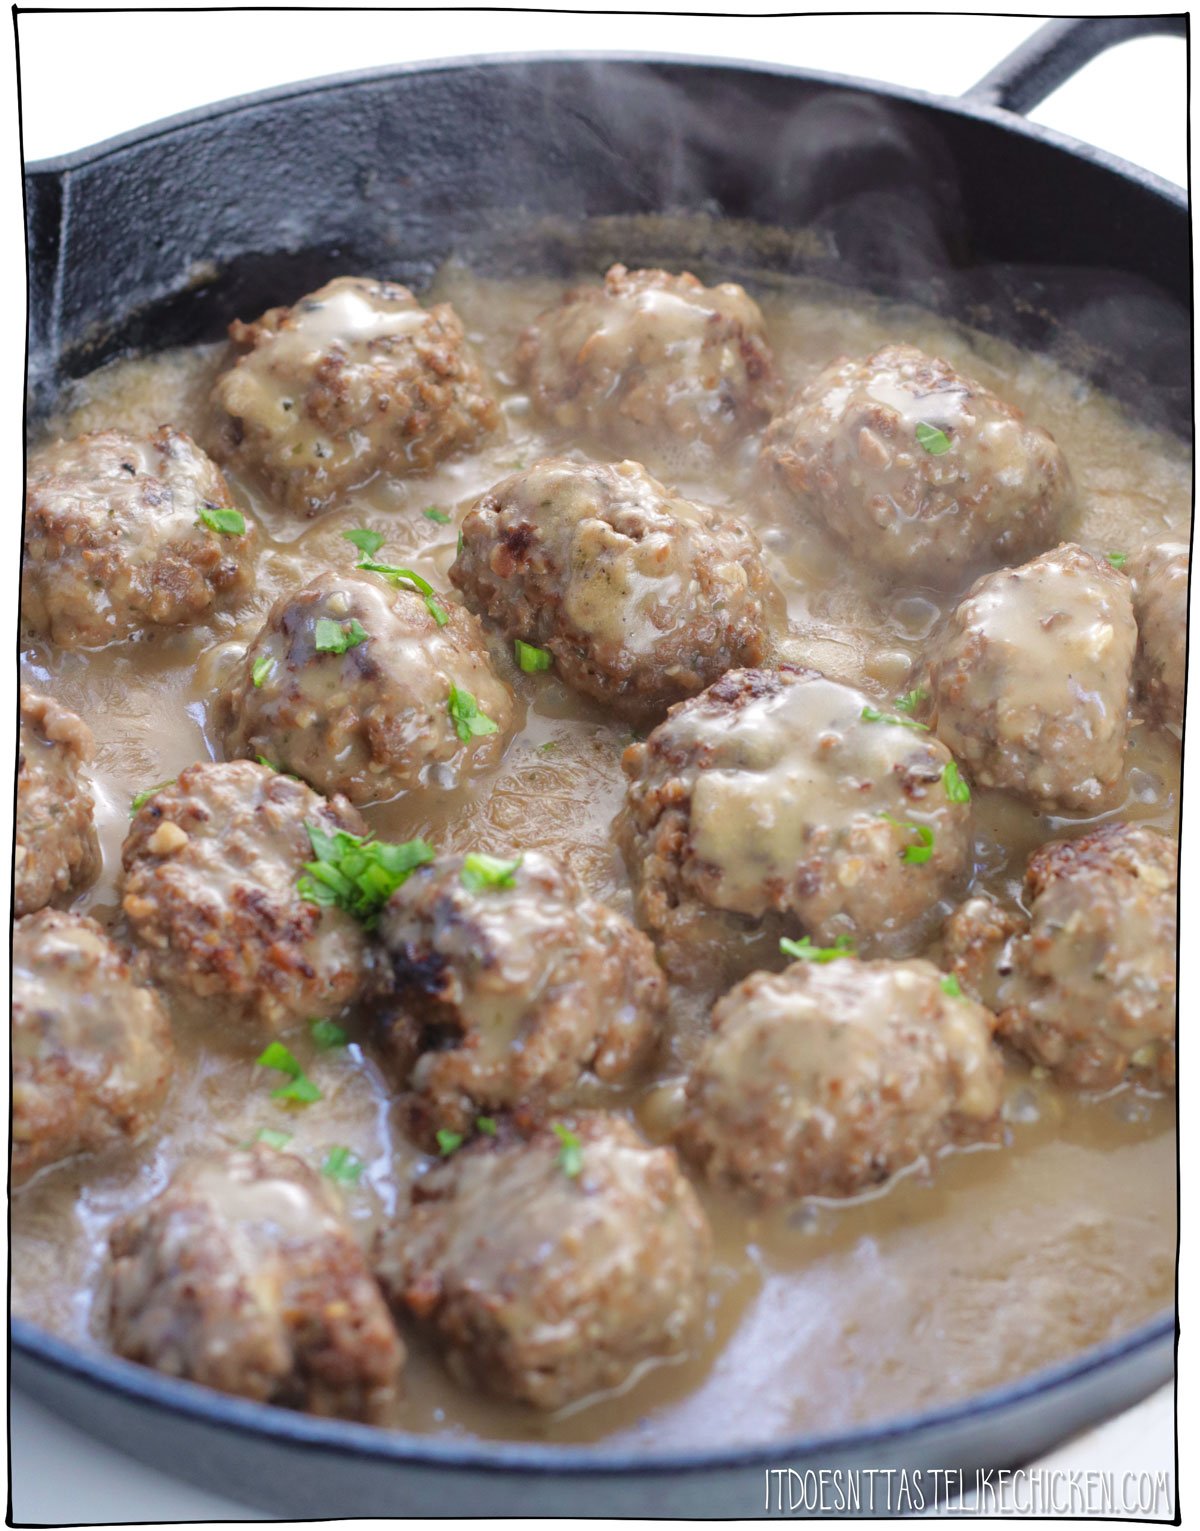 These Vegan Swedish Meatballs are so meaty, that you might just fool a meat eater! Delicious homemade seitan meatballs are covered in a rich and creamy gravy for the ultimate comfort food. These taste better than IKEA's! #itdoesnttastelikechicken #vegan #seitan